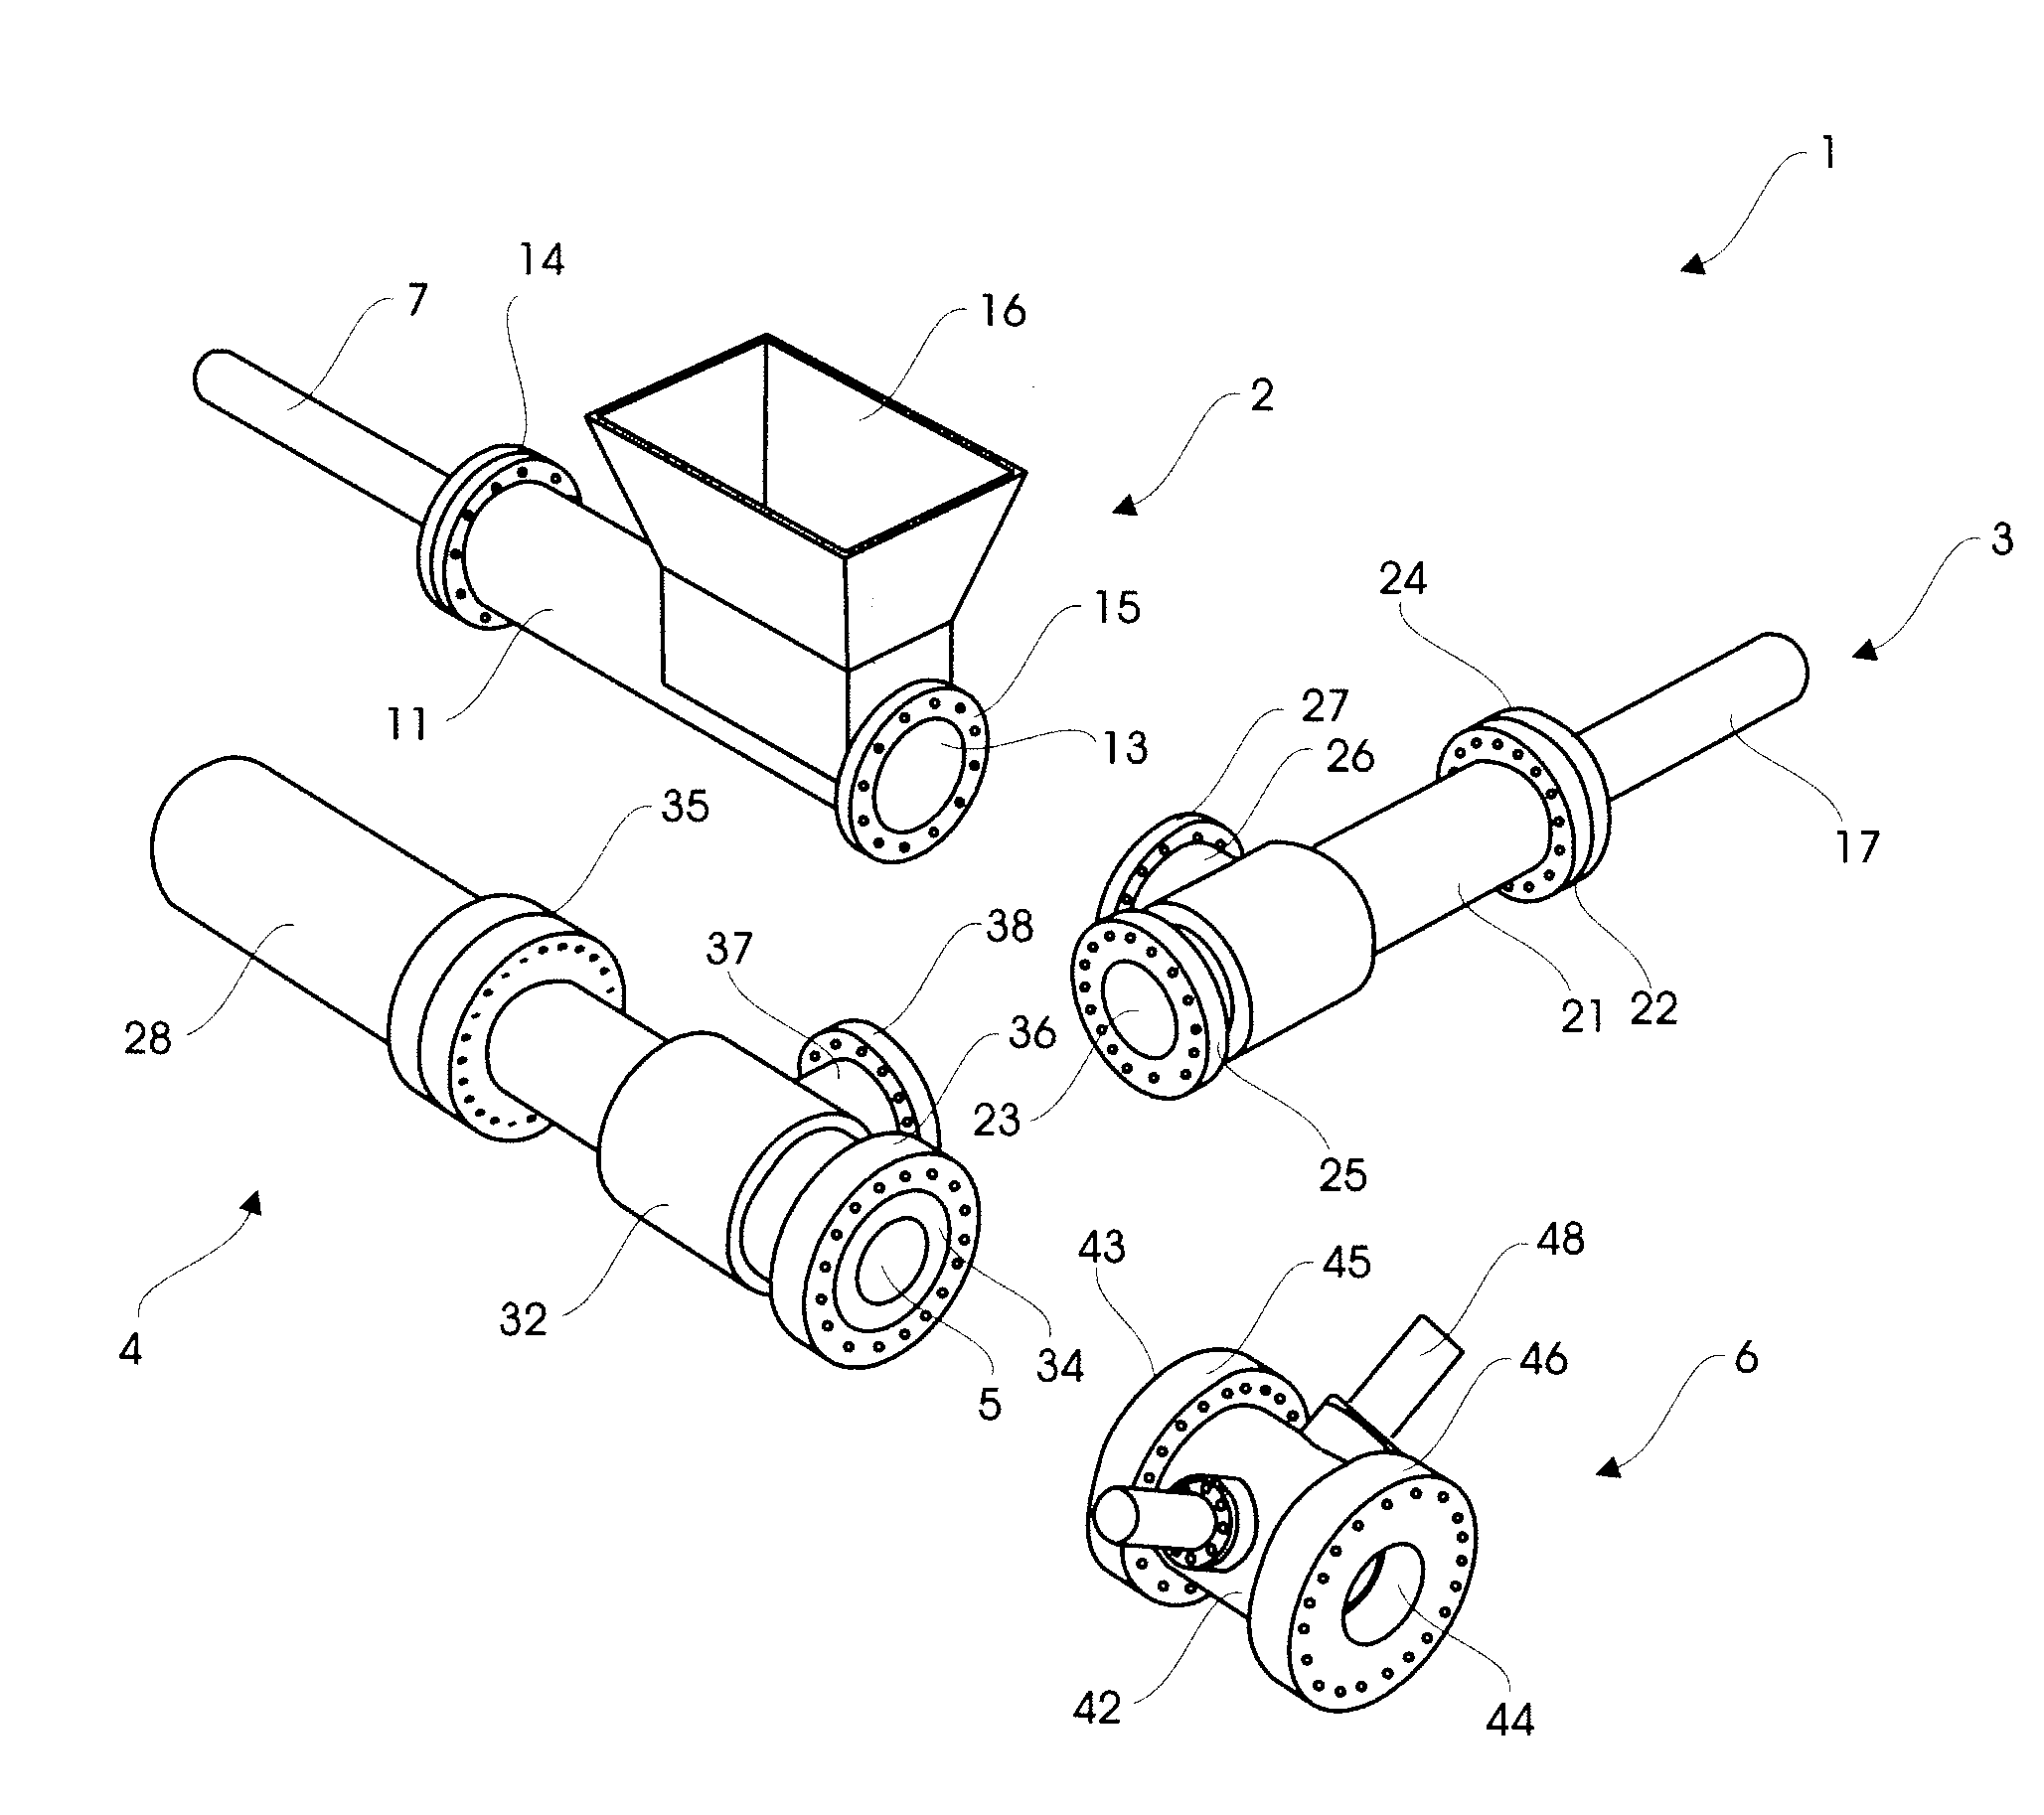 Feeding apparatus for creation of one or more plugs of compressible material for feeding into a gasifier or reactor